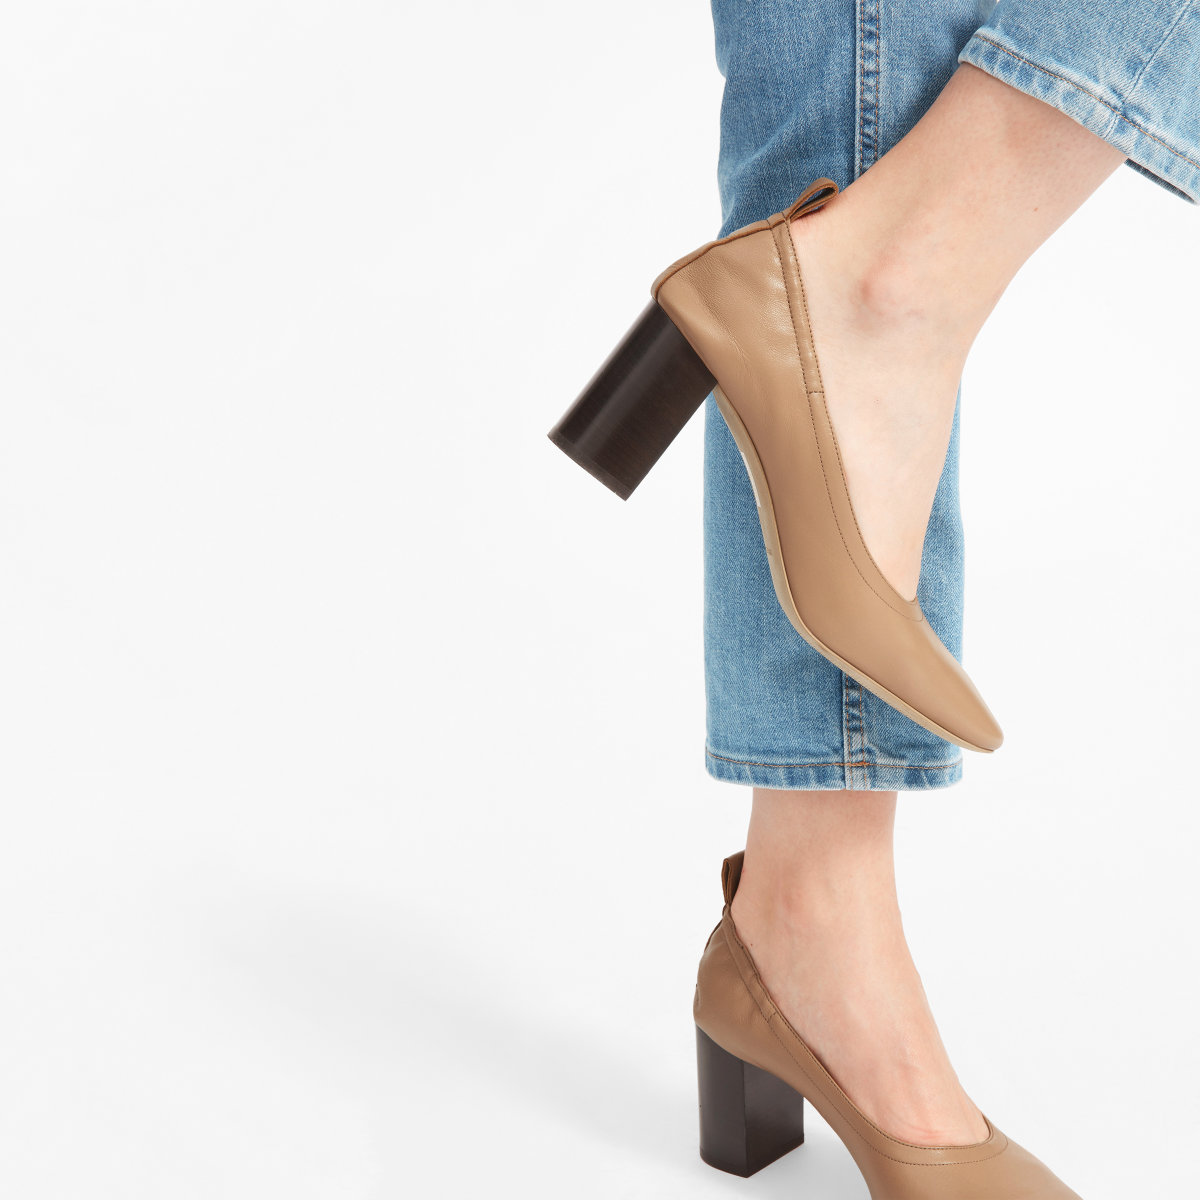 The Day High Heel: Everlane's Solution 